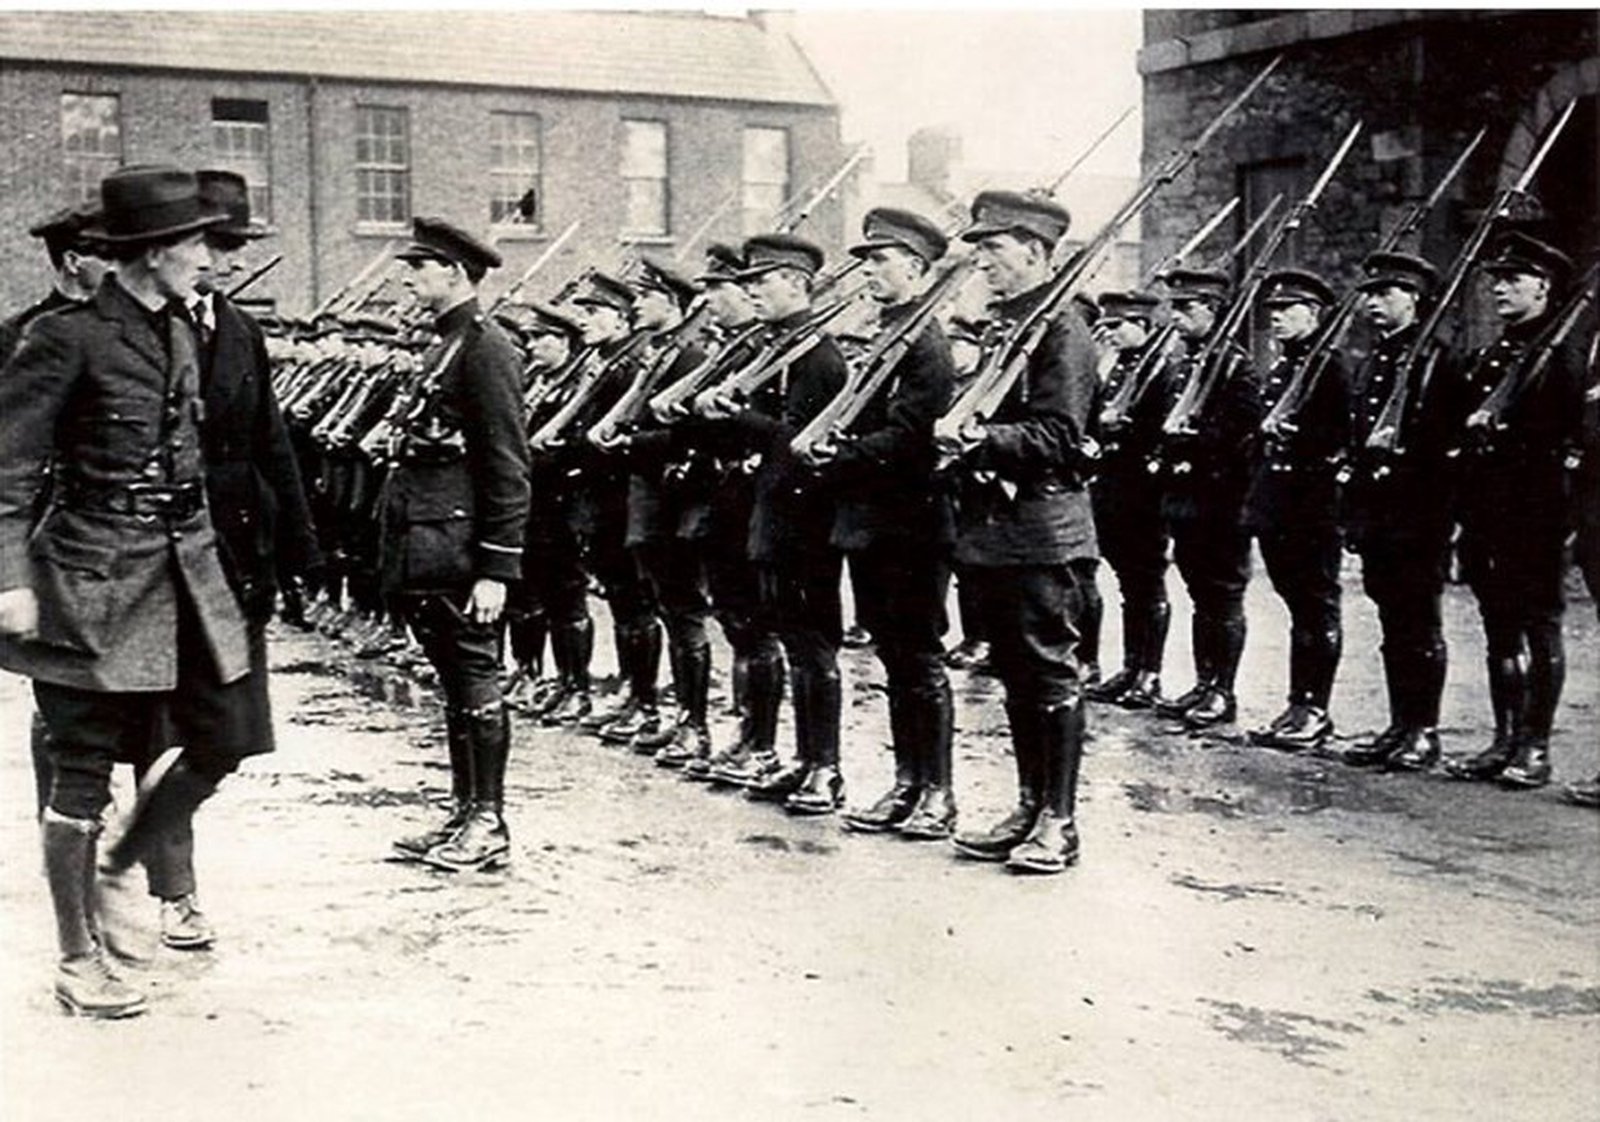 Image - General Richard Mulcahy inspecting troops. He knew how raw and unformed this new army was (Pic: Getty Images)